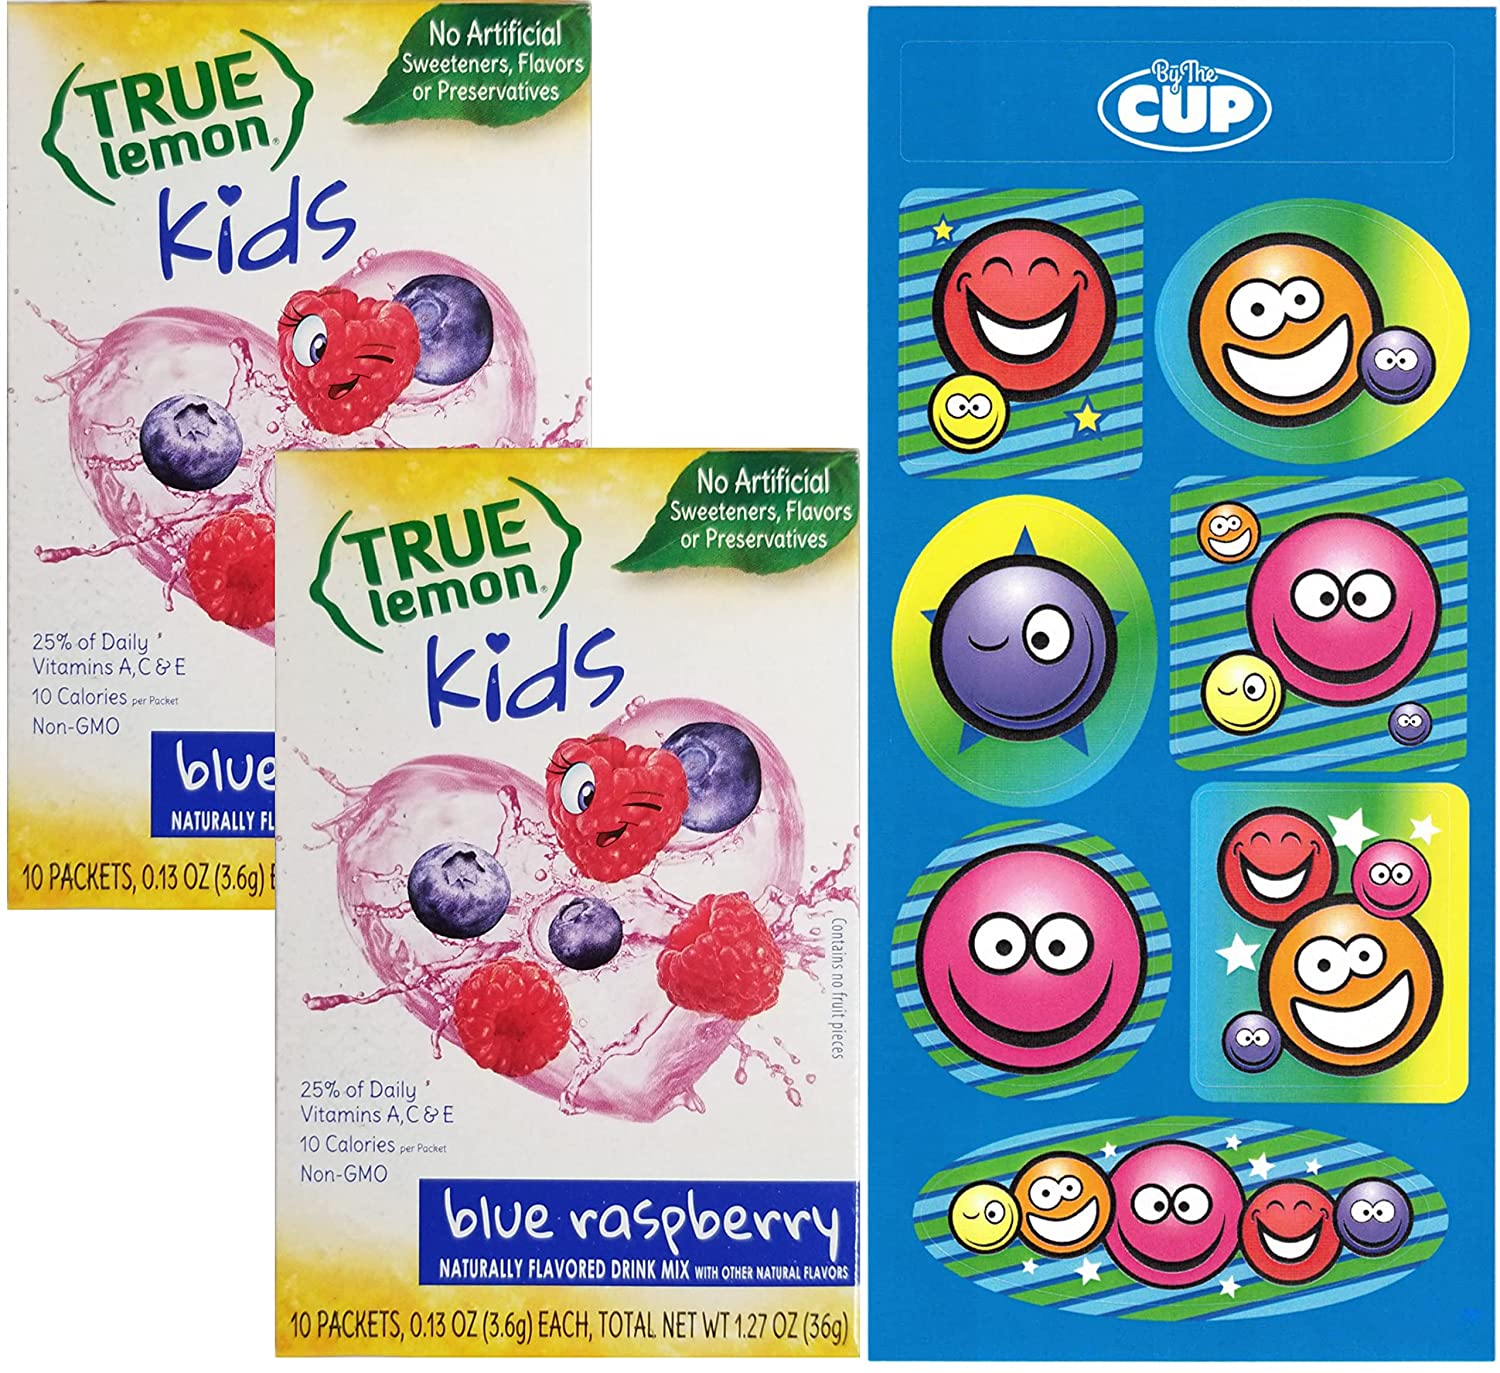 True Lemon Kids Blue Raspberry (Pack of 2) with By The Cup Stickers